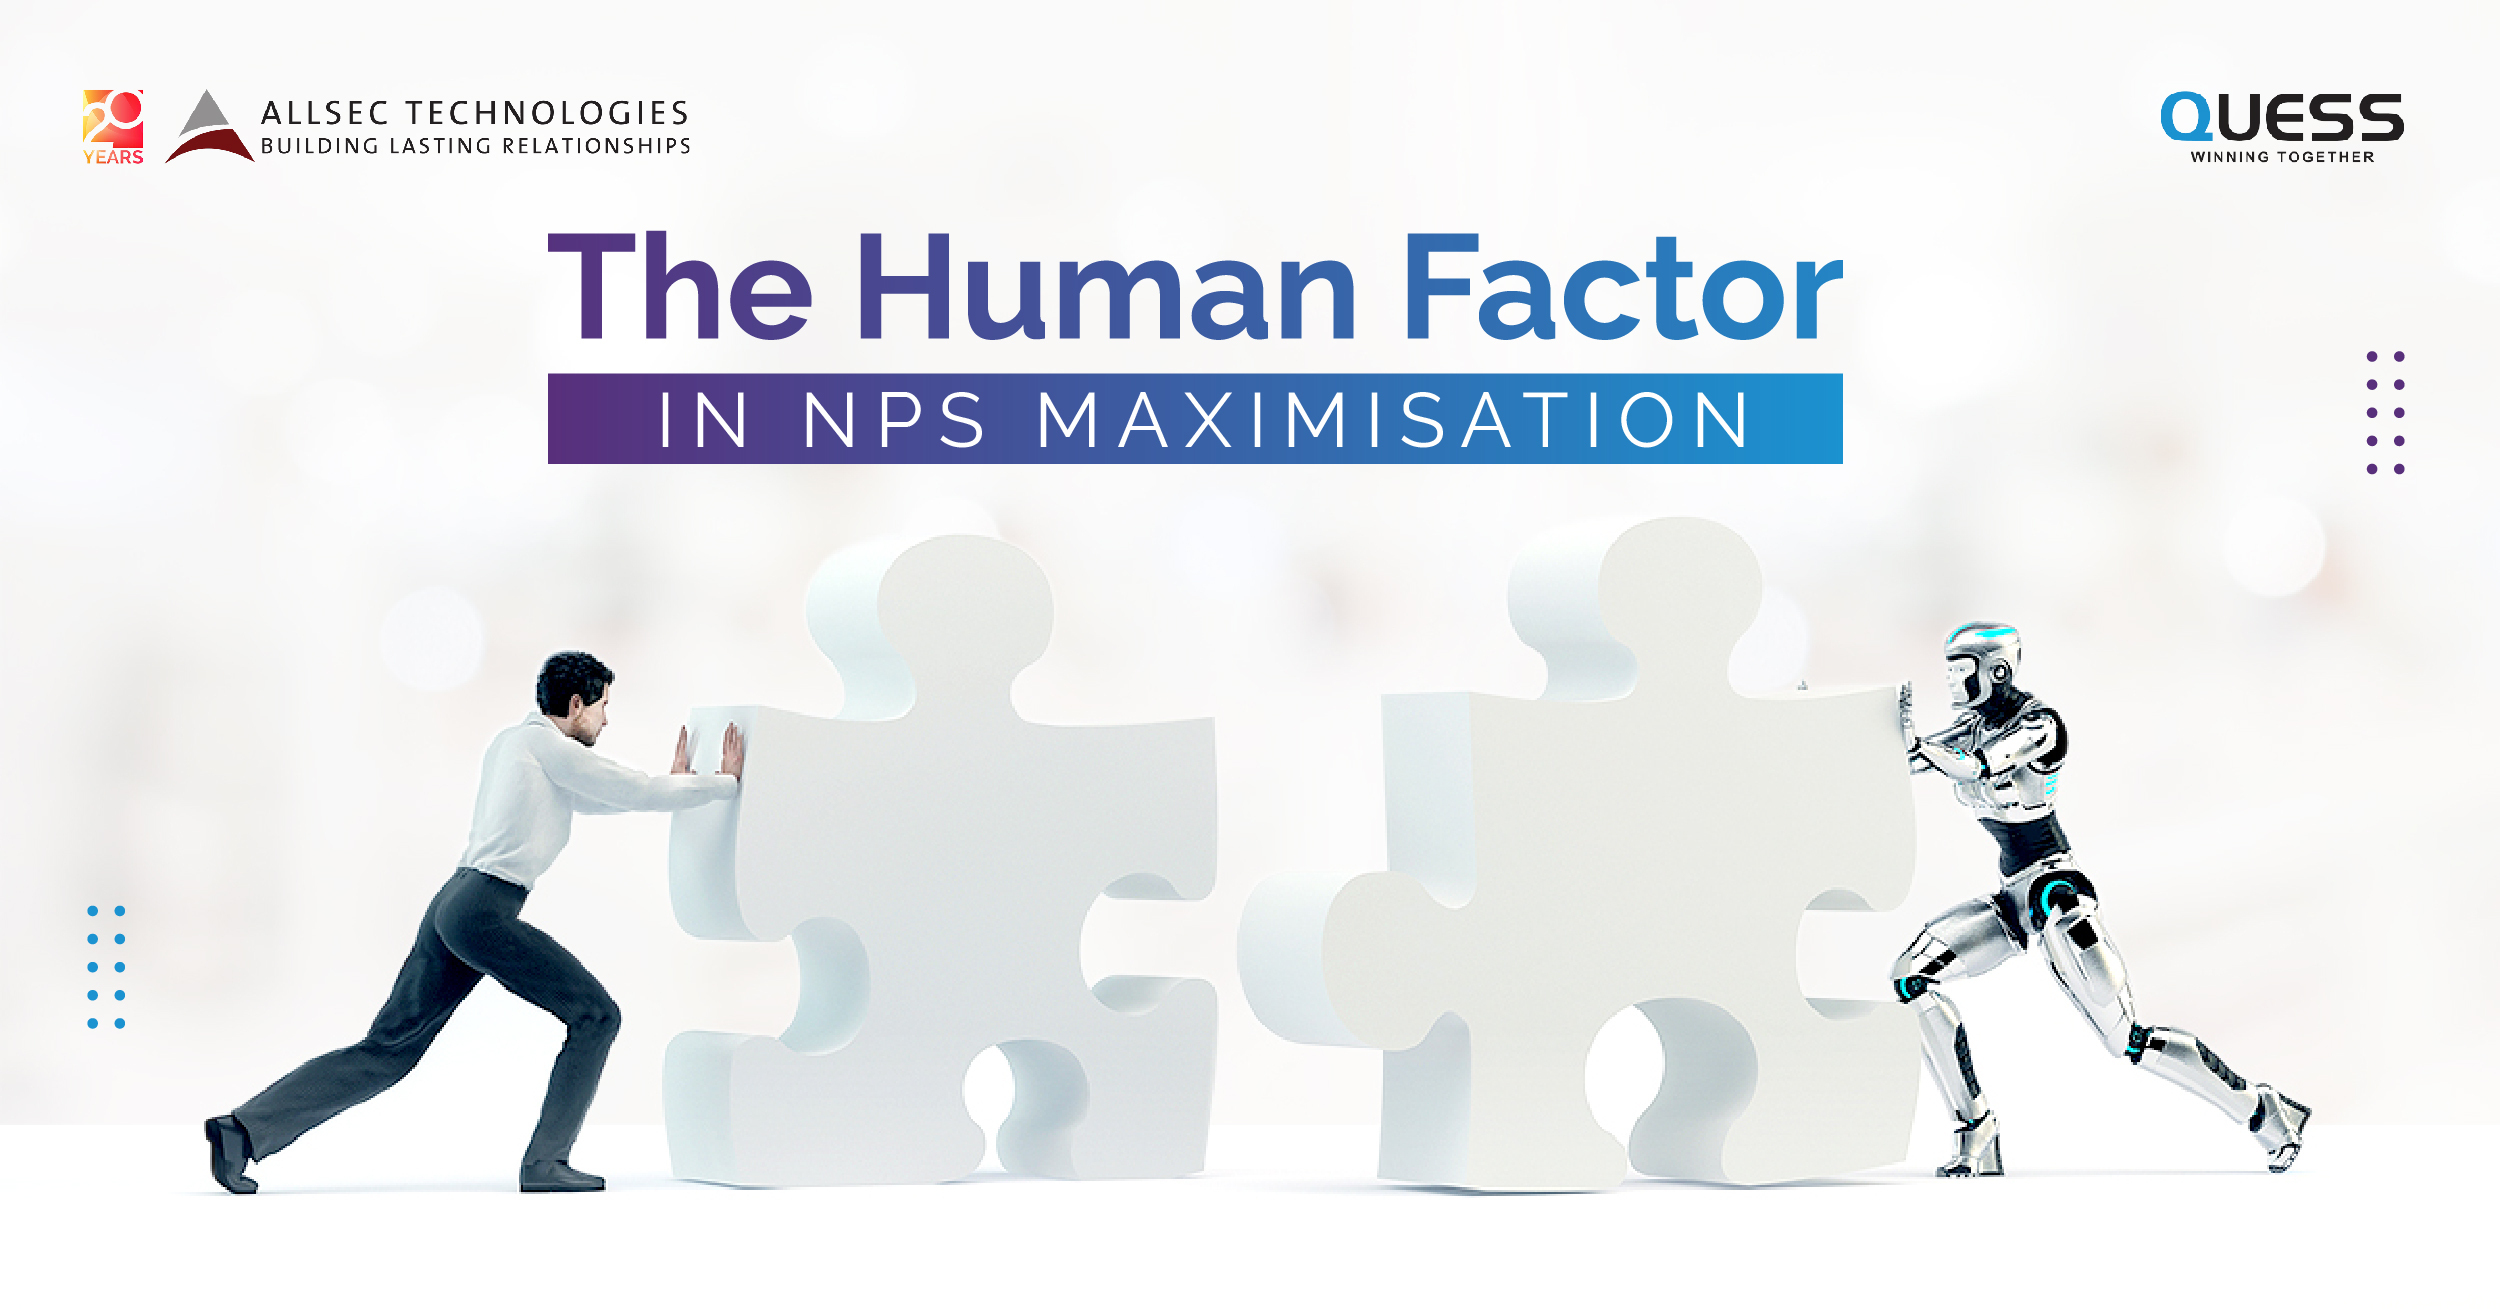 The Human Factor of NPS